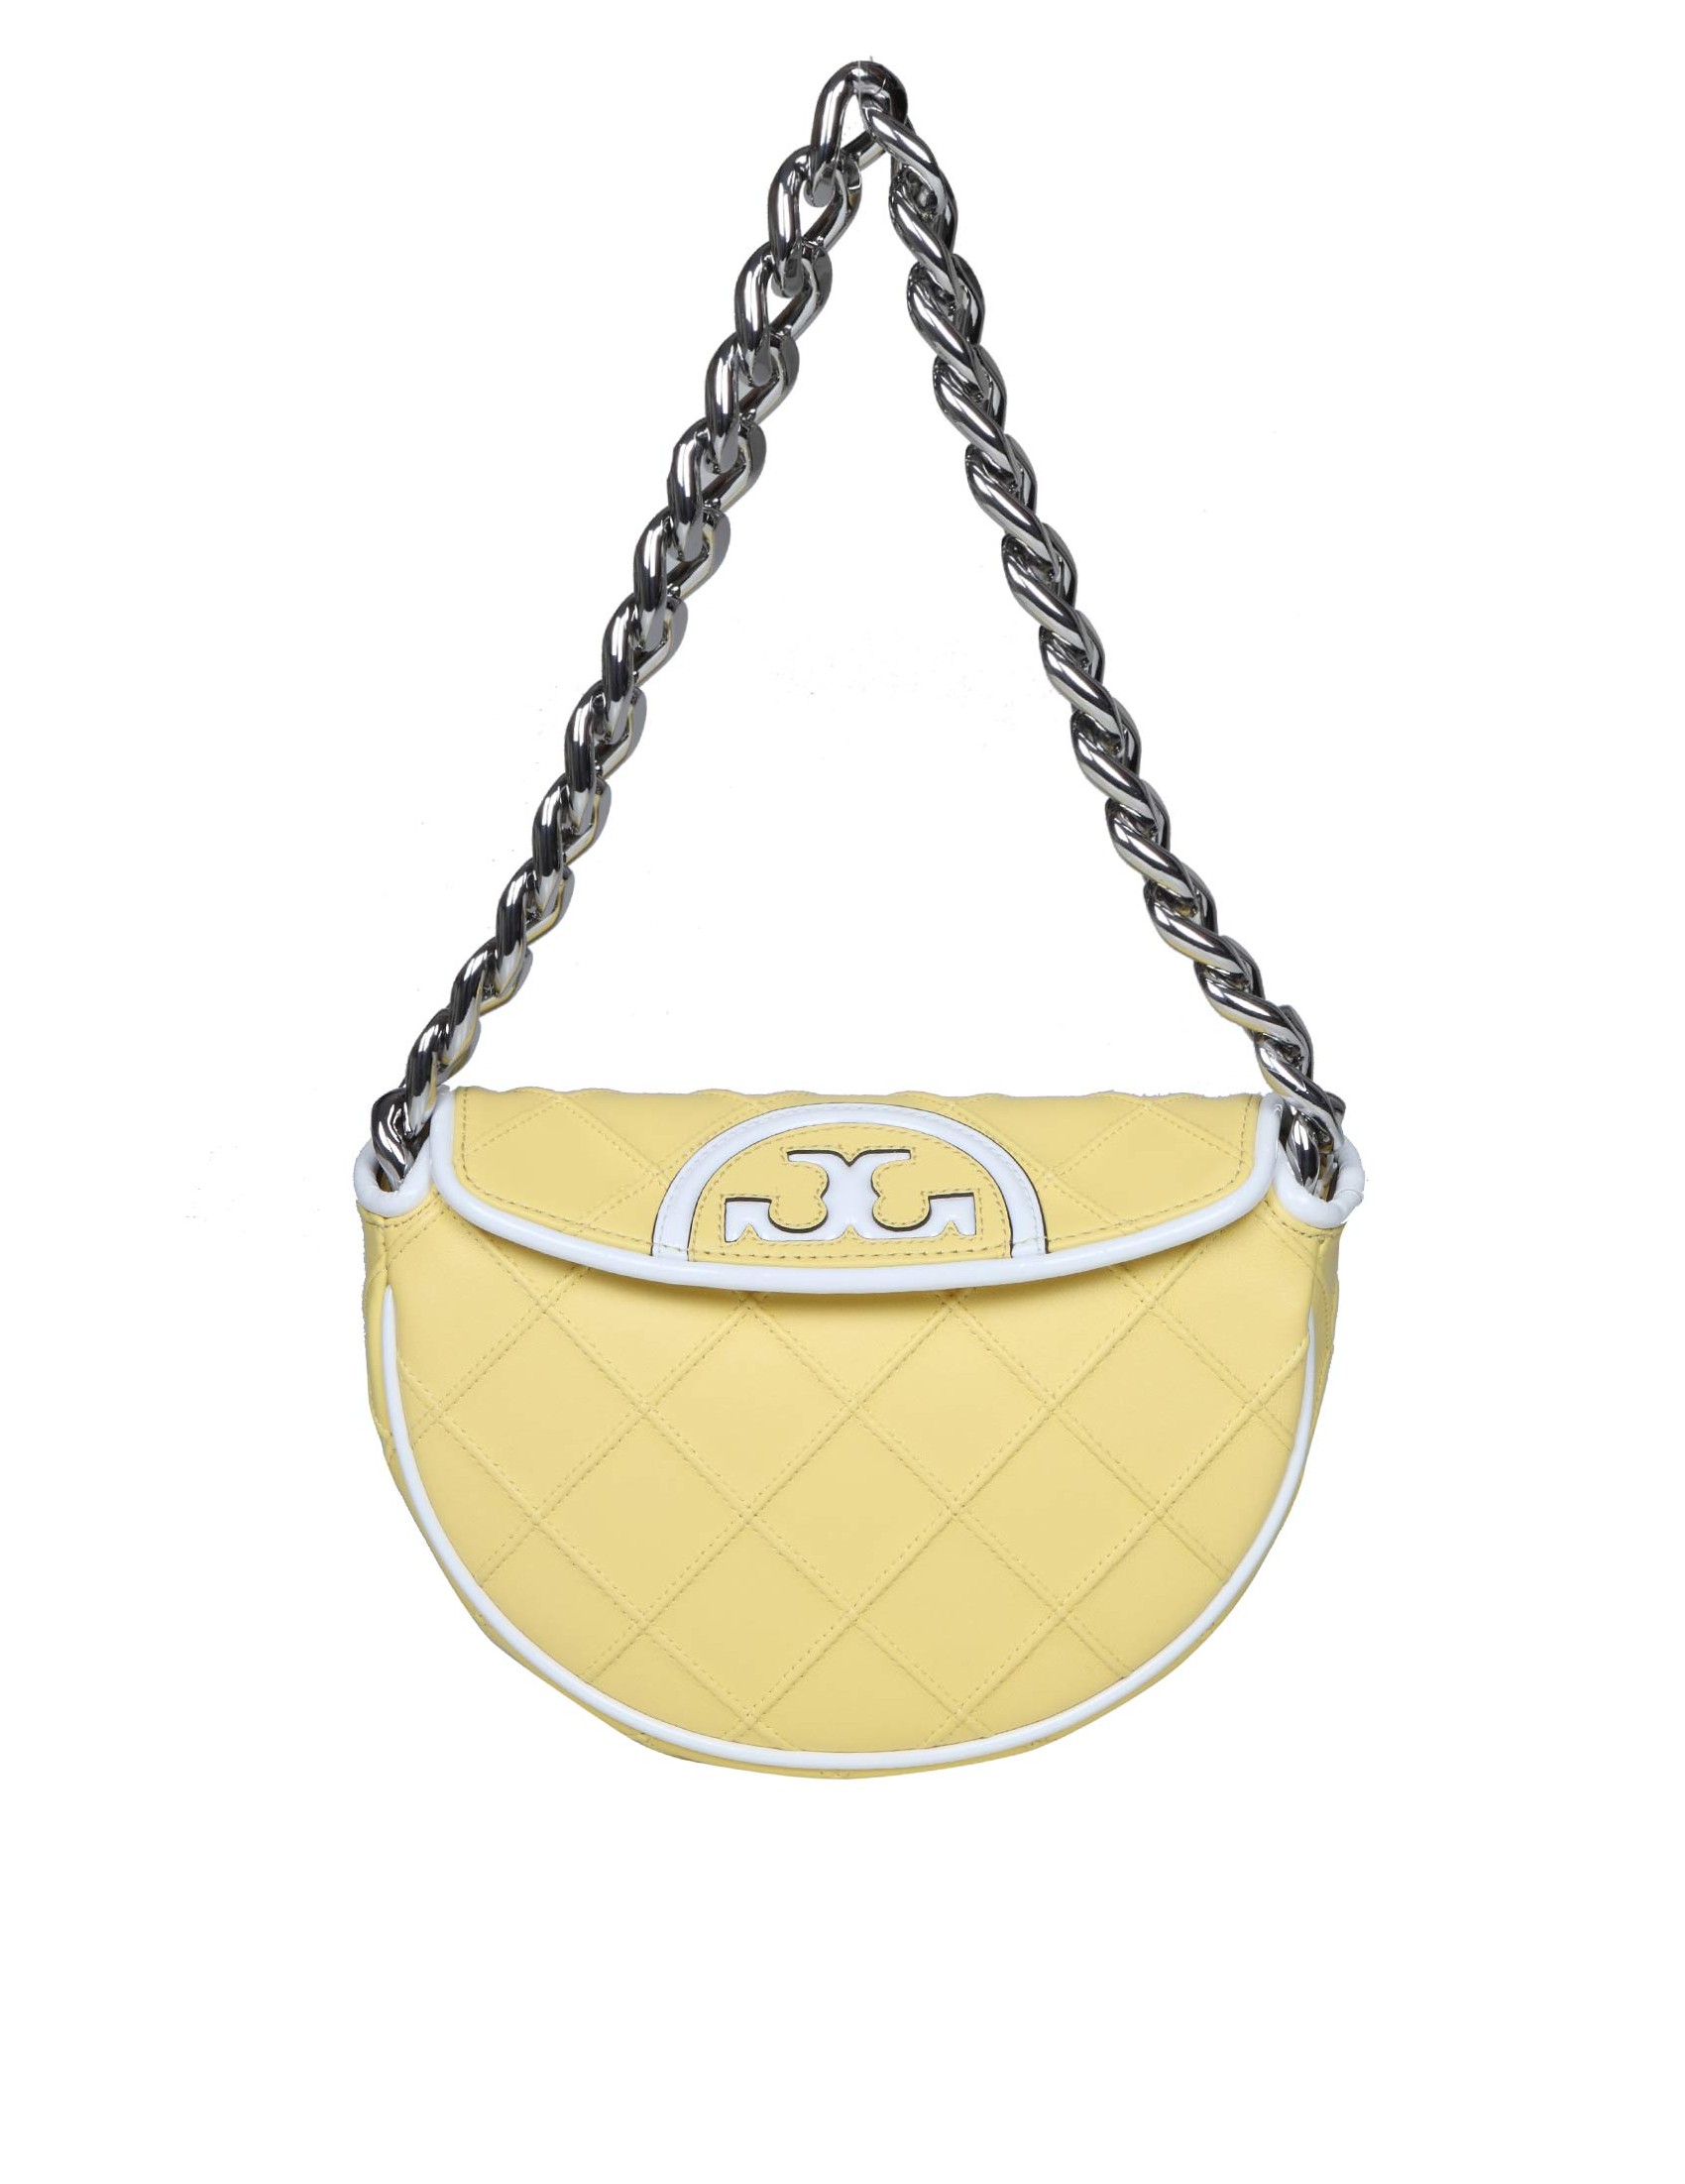 TORY BURCH MINI FLEMING IN QUILTED LEATHER